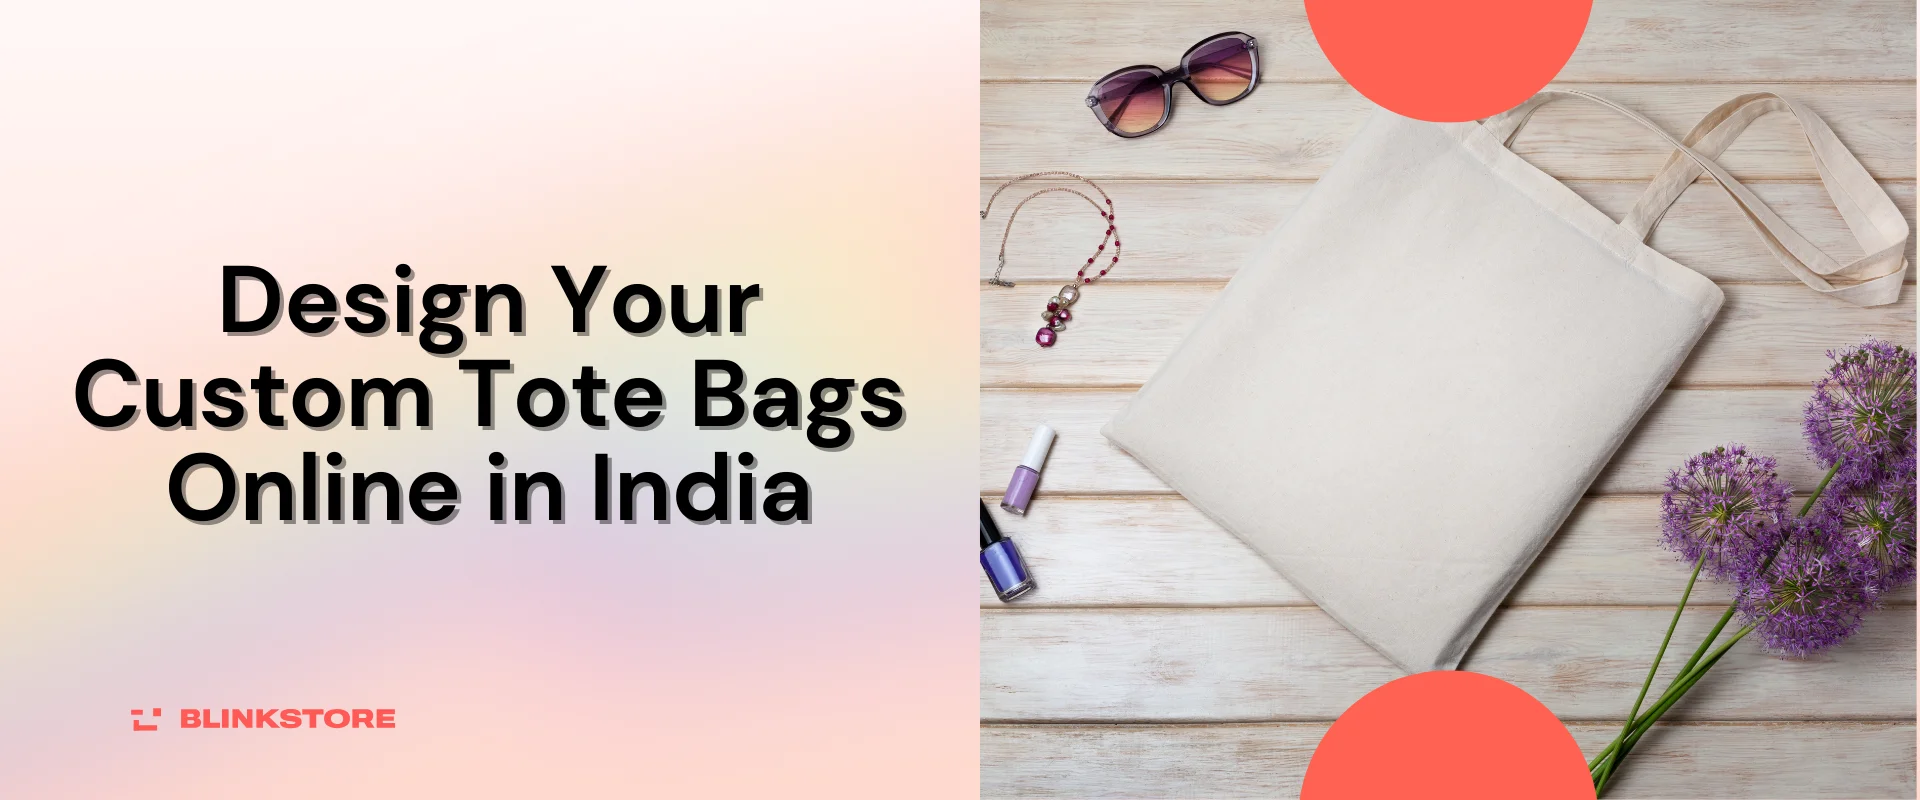 Design Your Custom Tote Bags Online in India